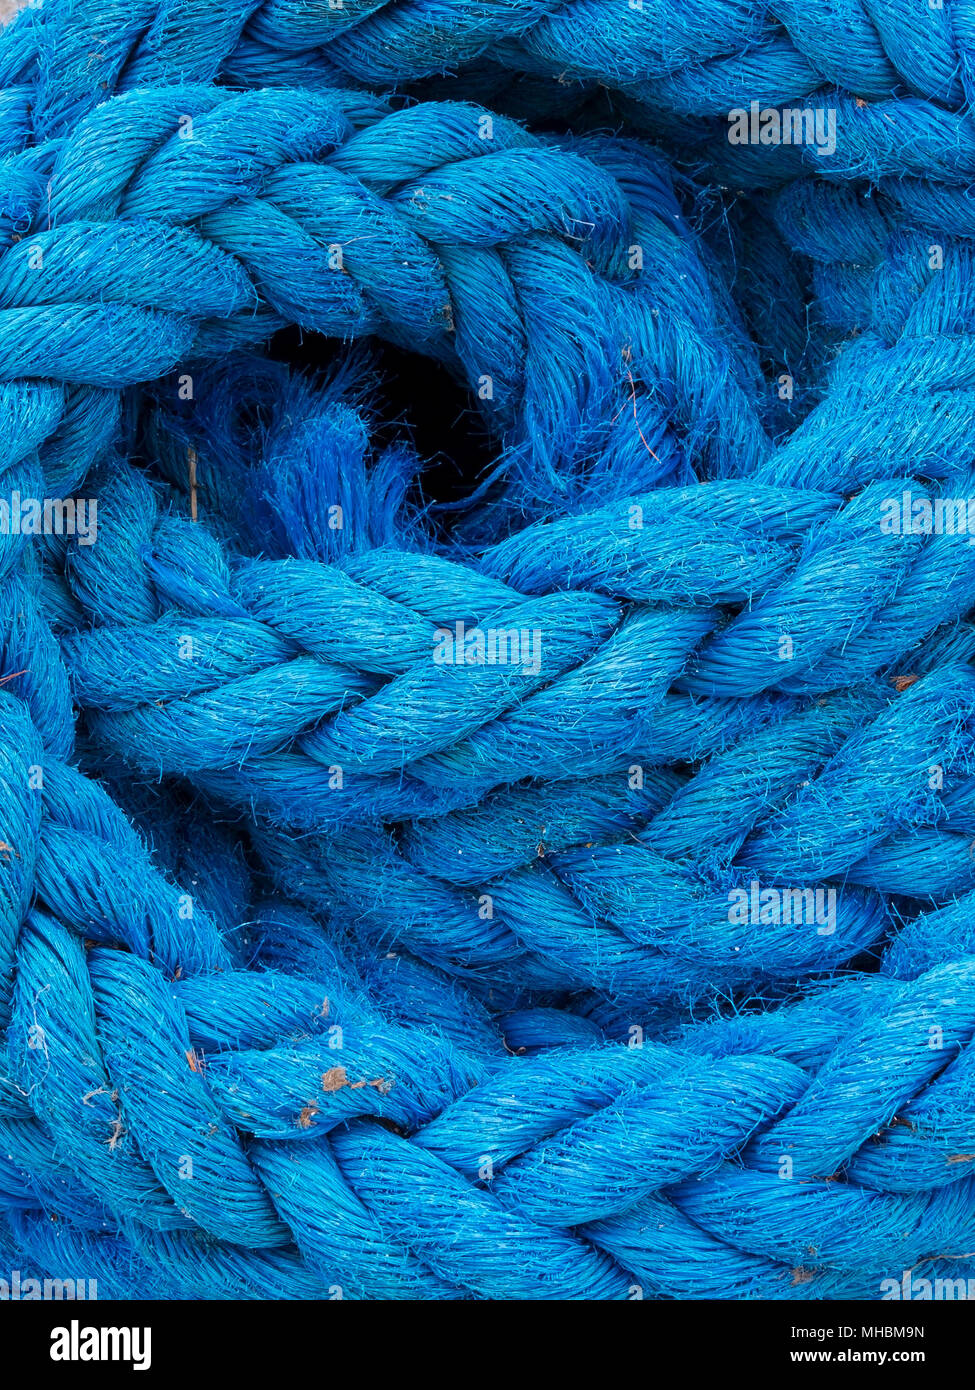 Coil of thick blue discarded nylon rope Stock Photo